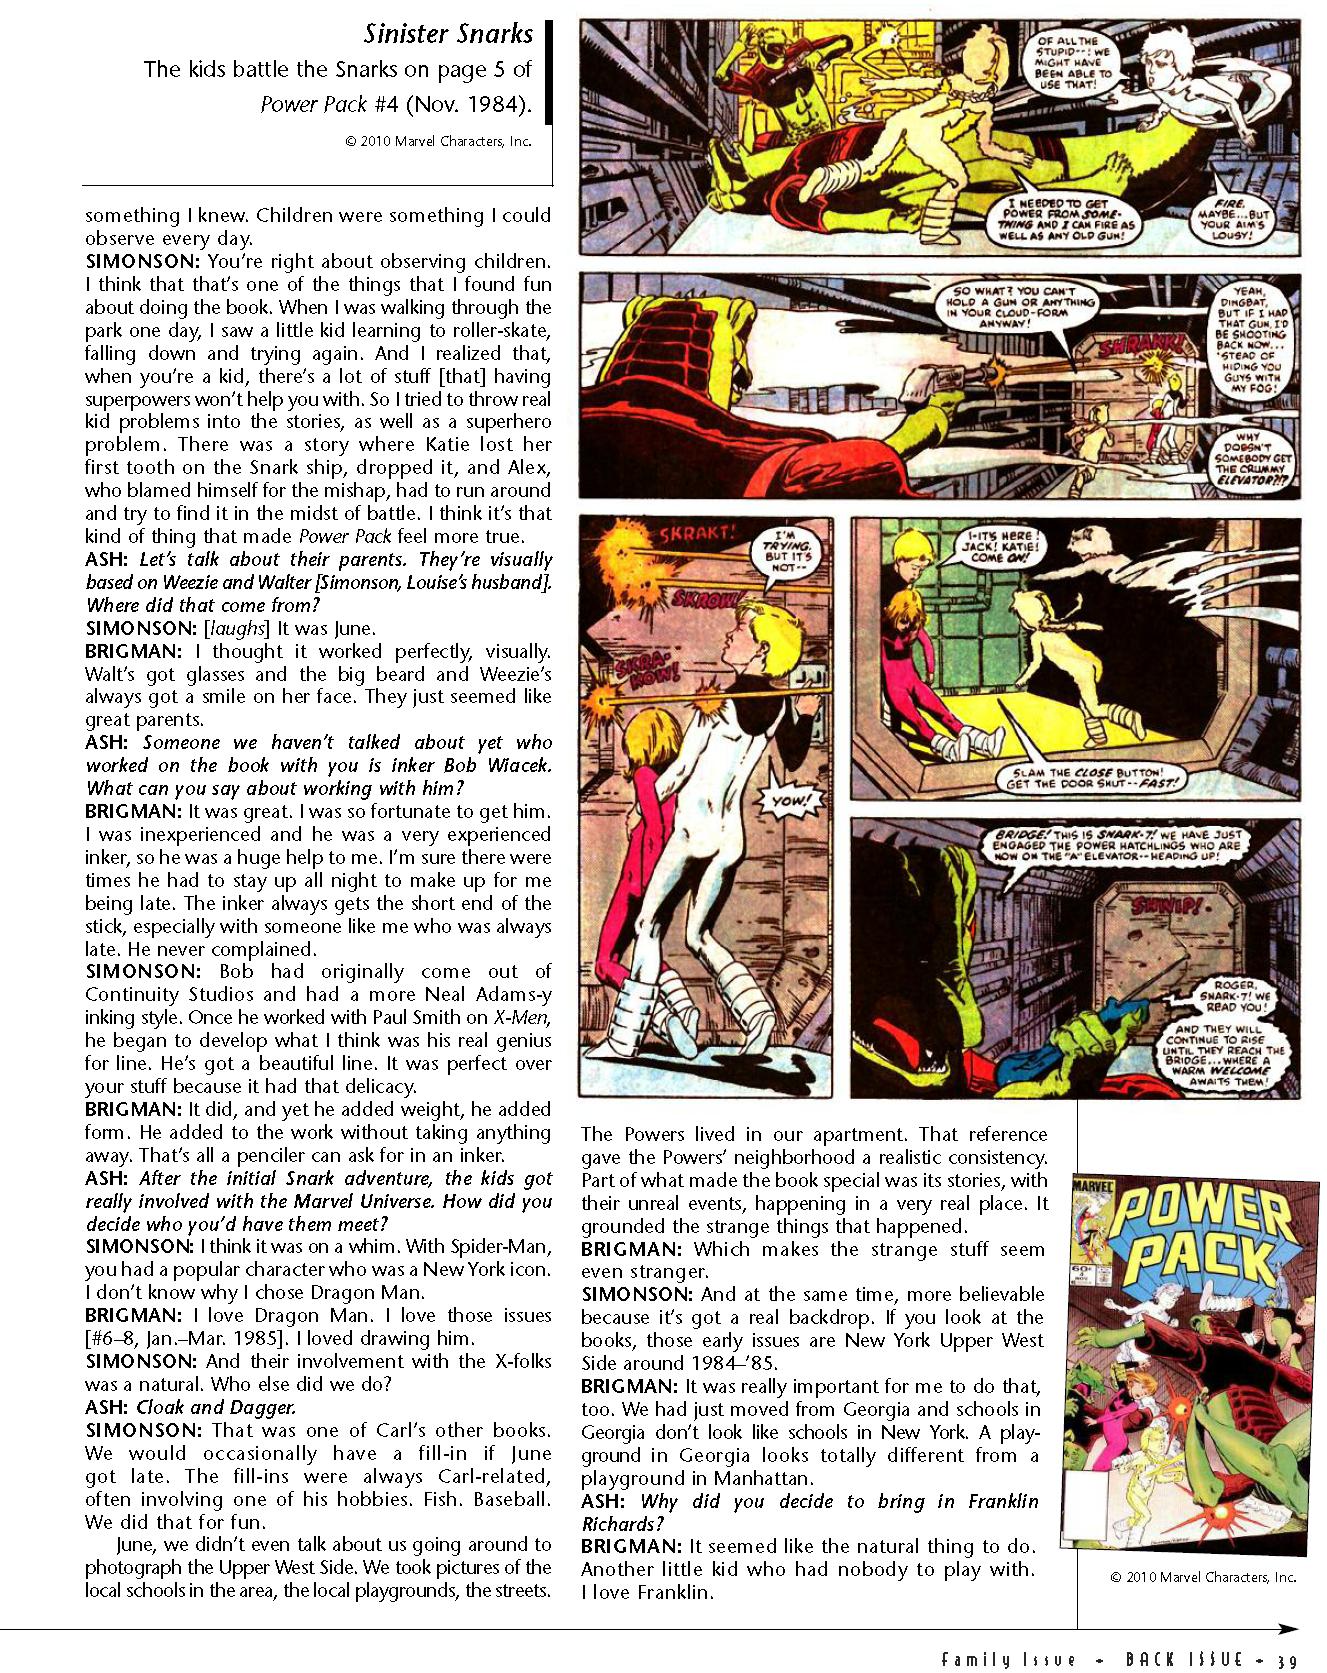 Read online Back Issue comic -  Issue #38 - 41